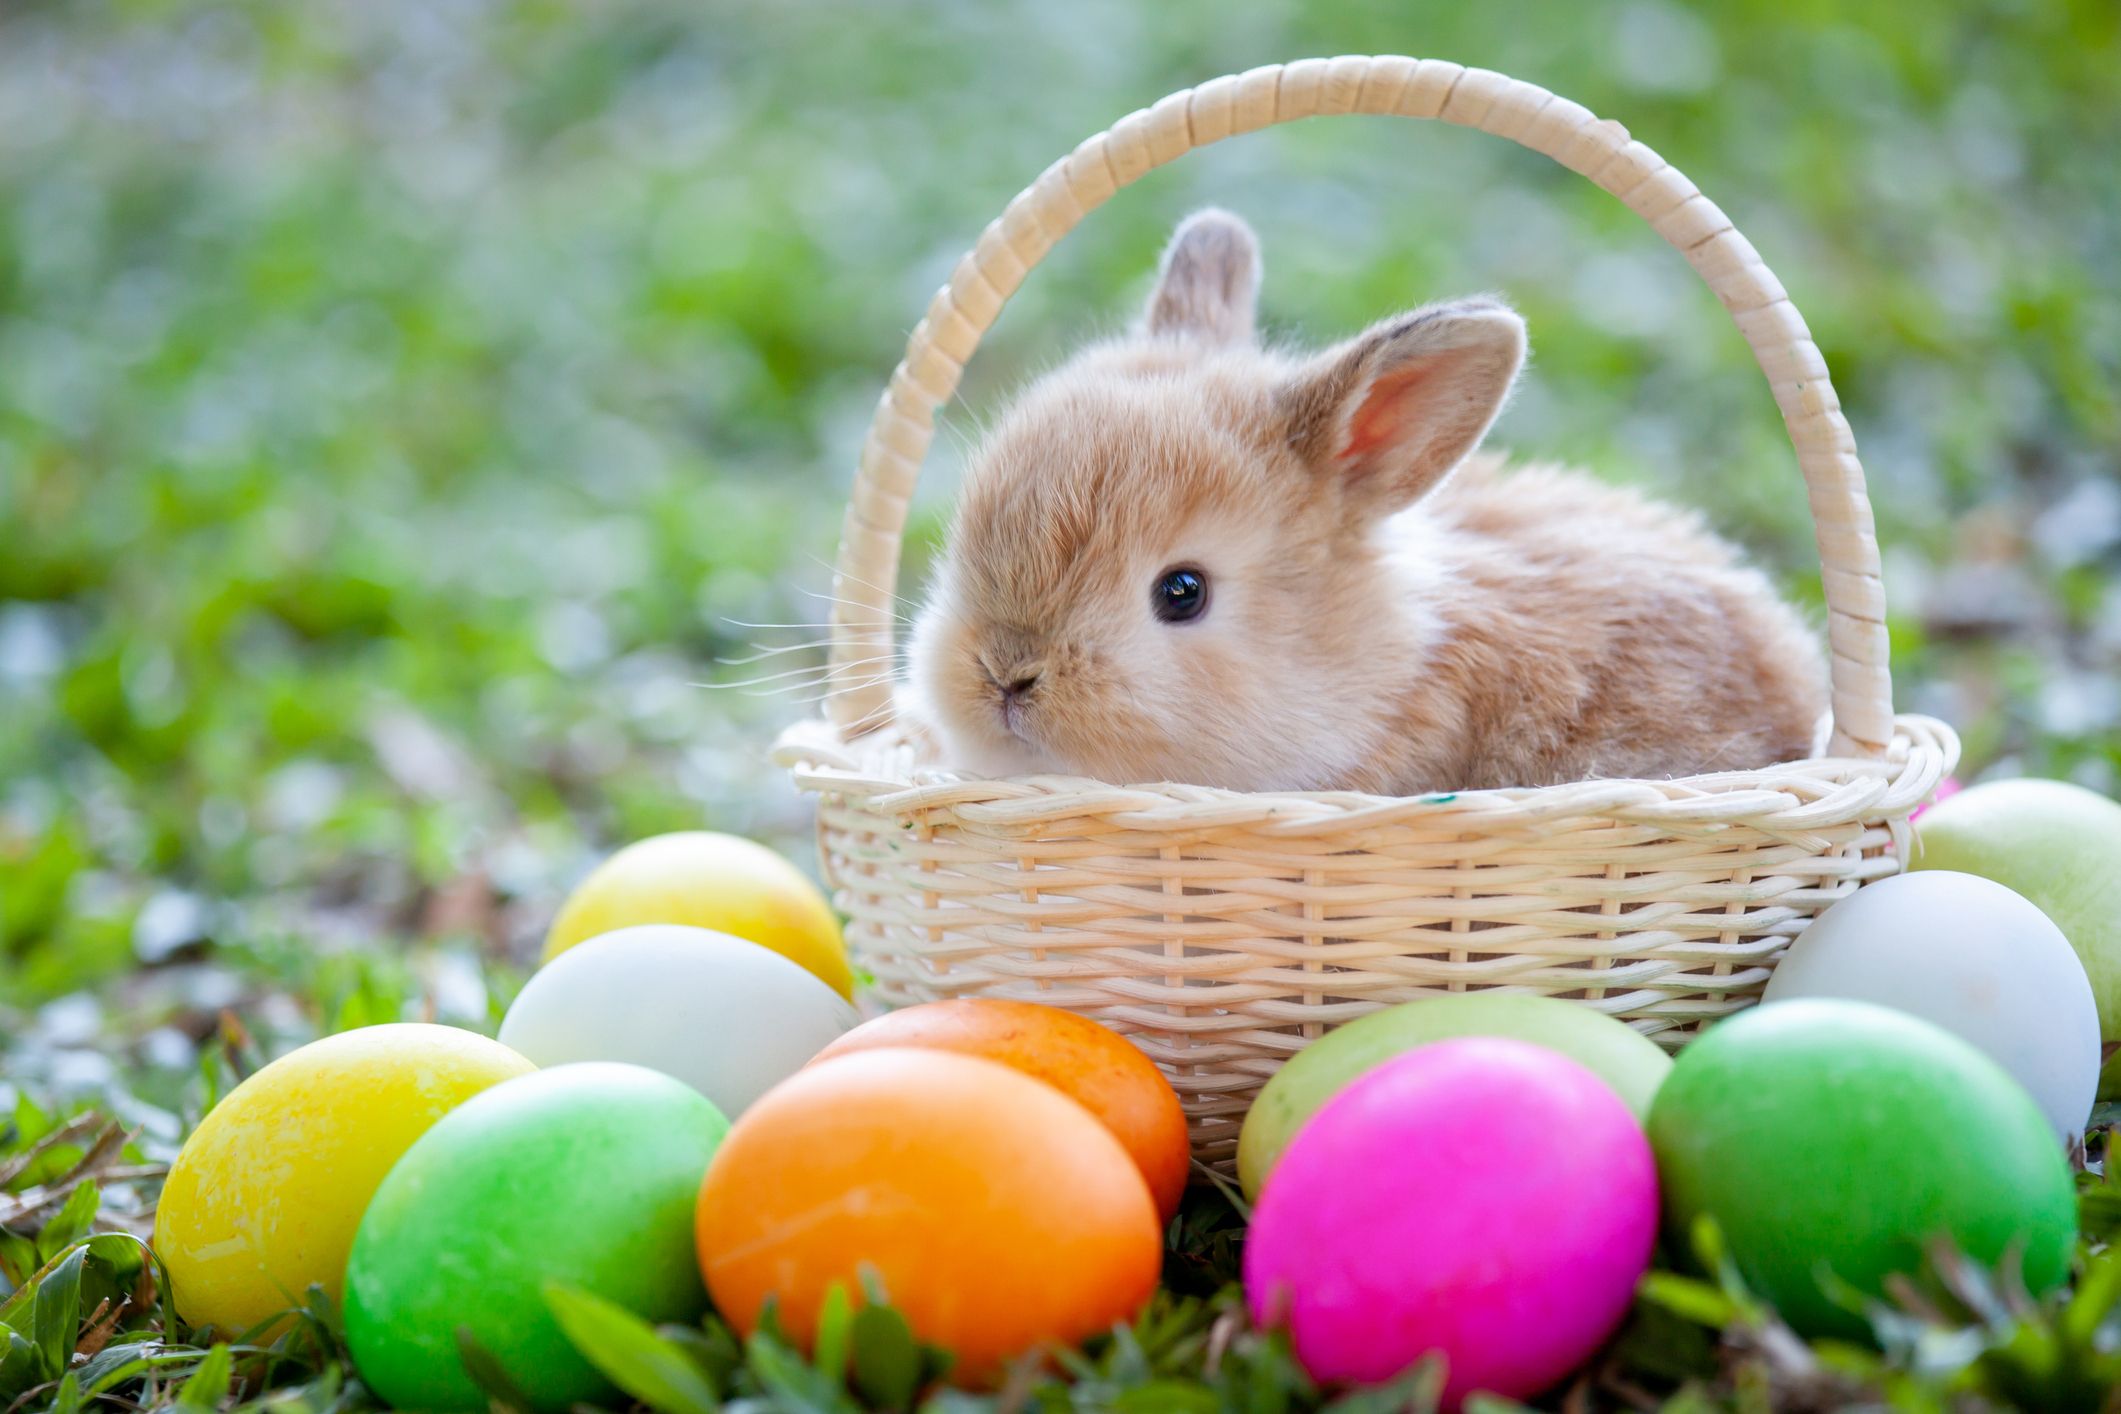 Ever wonder where egg dying and the Easter Bunny come from? Here's some Easter history!